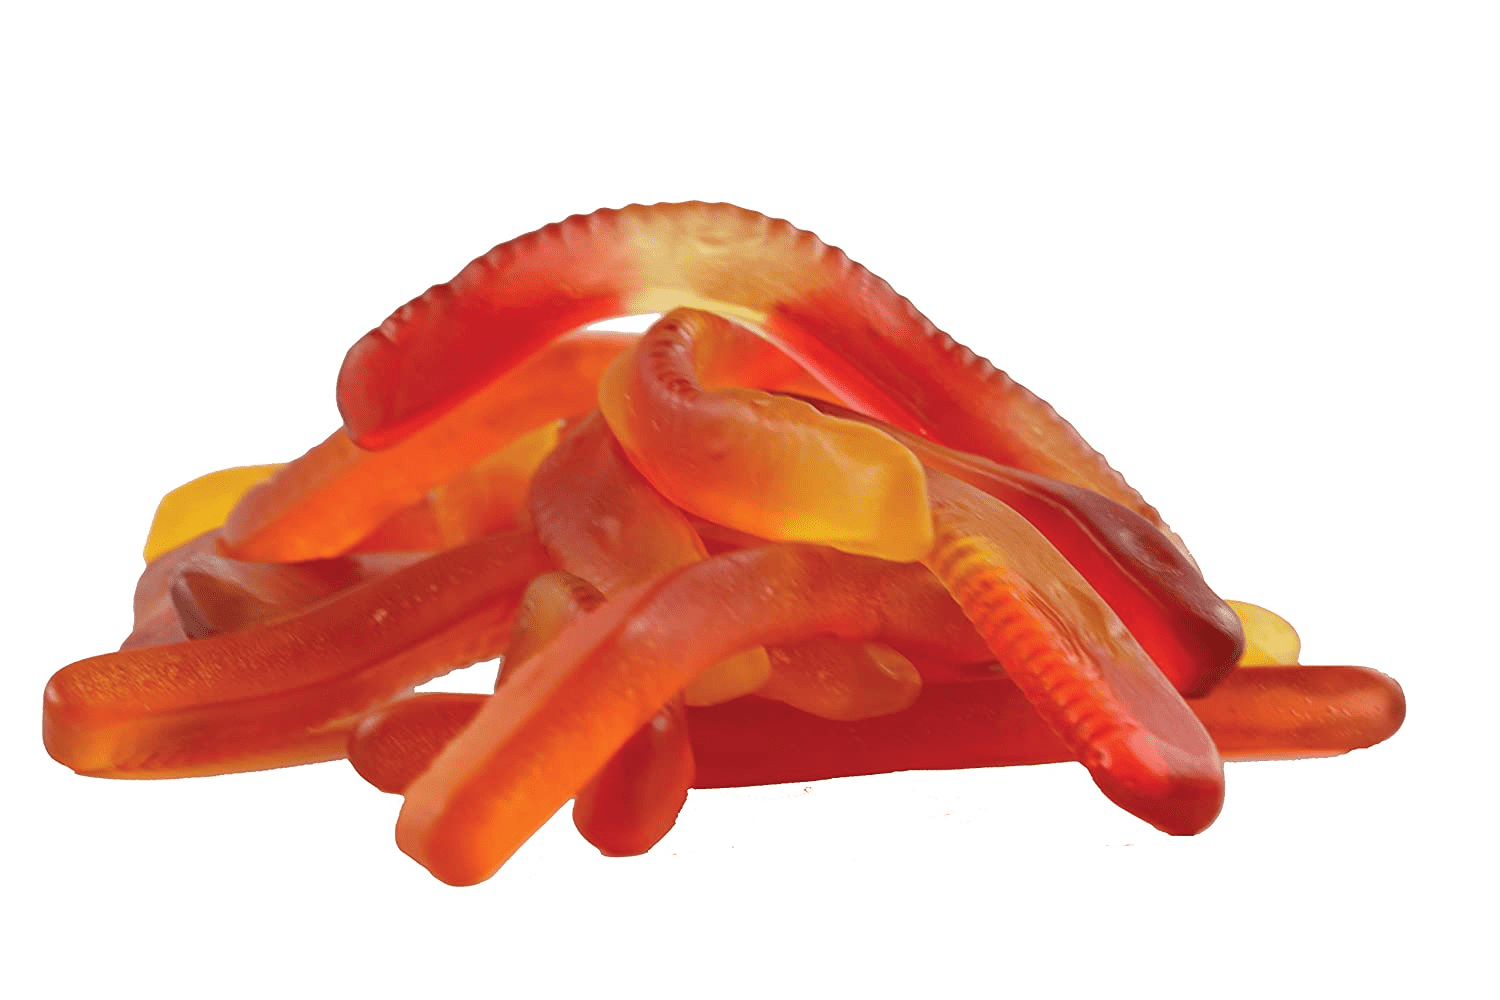 Surf Sweets Gummy Worms 2 units per case 5.0 lbs